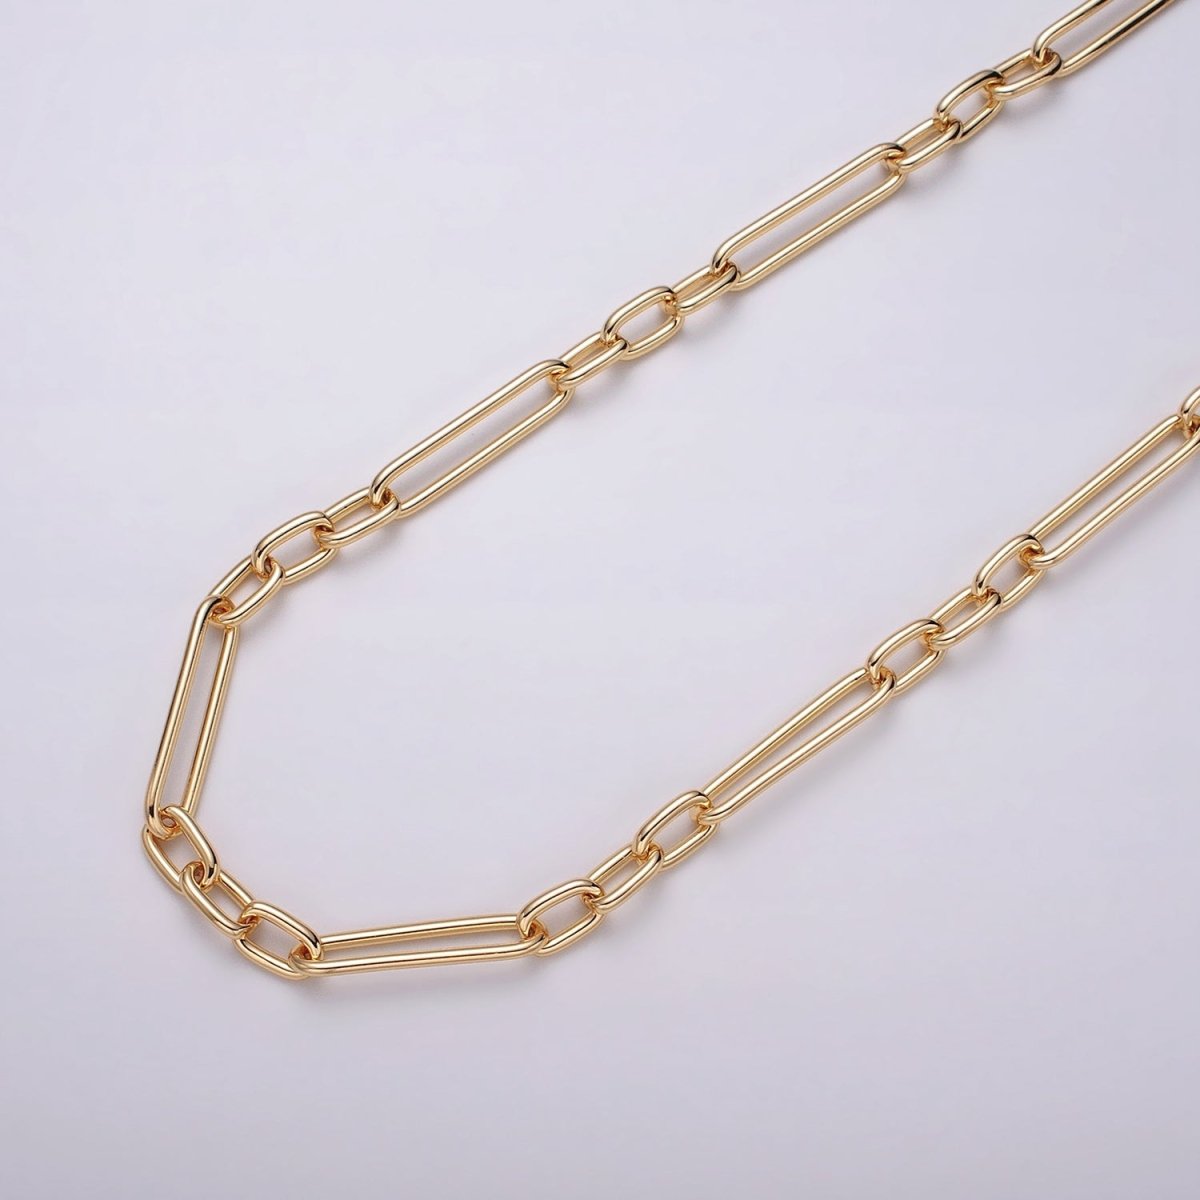 18K Gold Filled Stadium Chain by Yard Figaro Long and Short Fancy Wholesale bulk by Yard for Jewelry Making | ROLL-1259 ROLL-1260 Clearance Pricing - DLUXCA